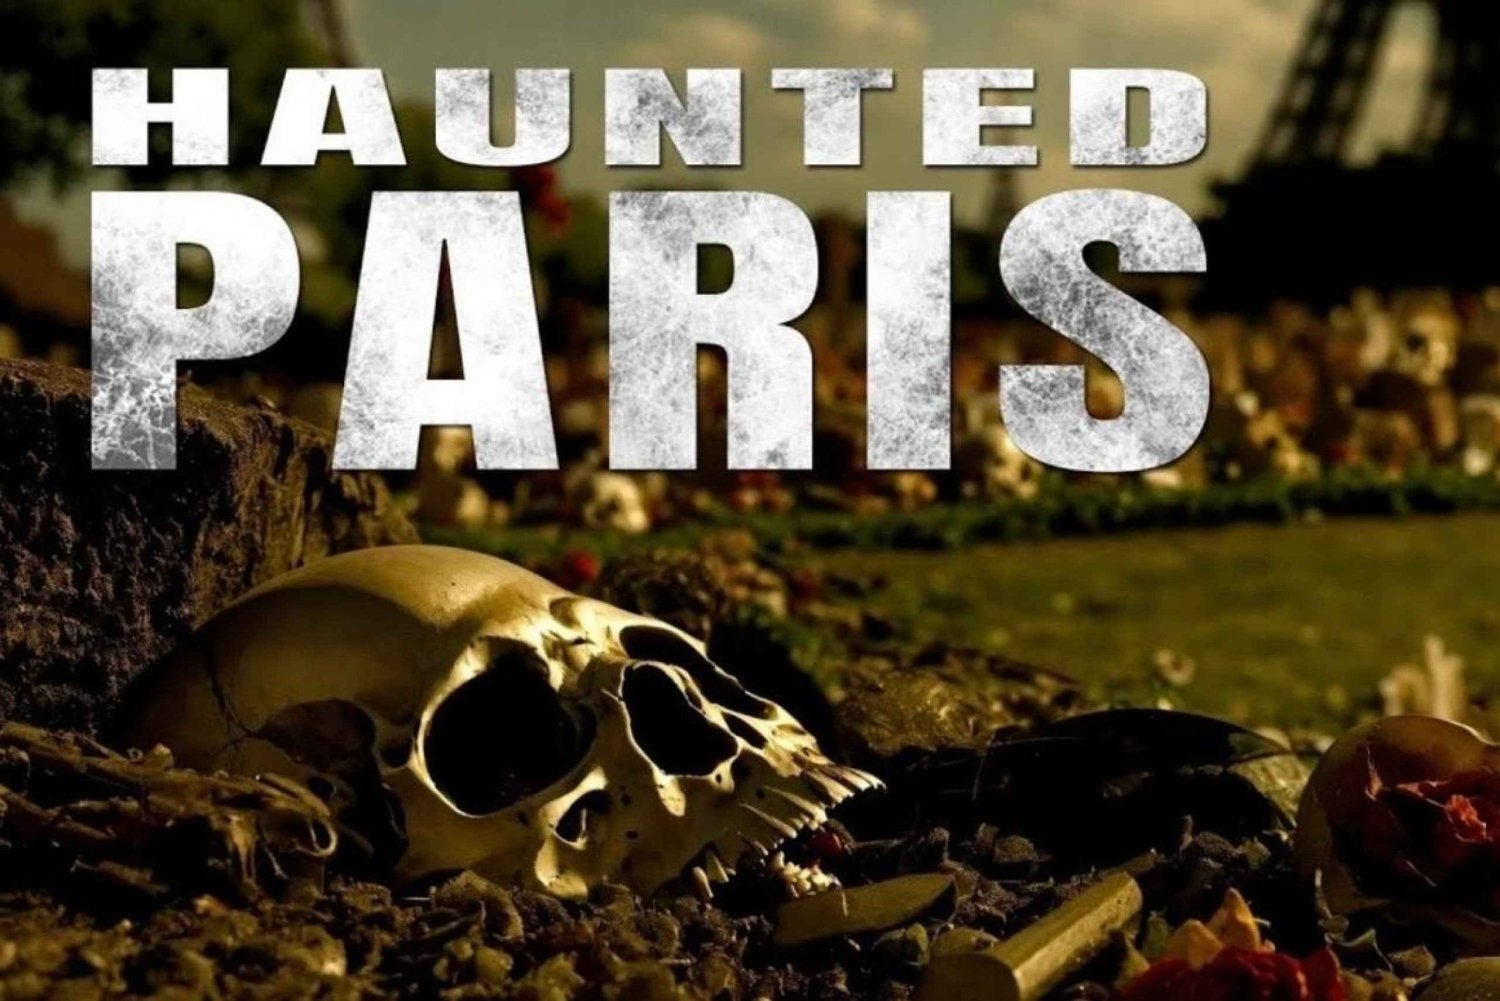 The Haunted Paris Experience